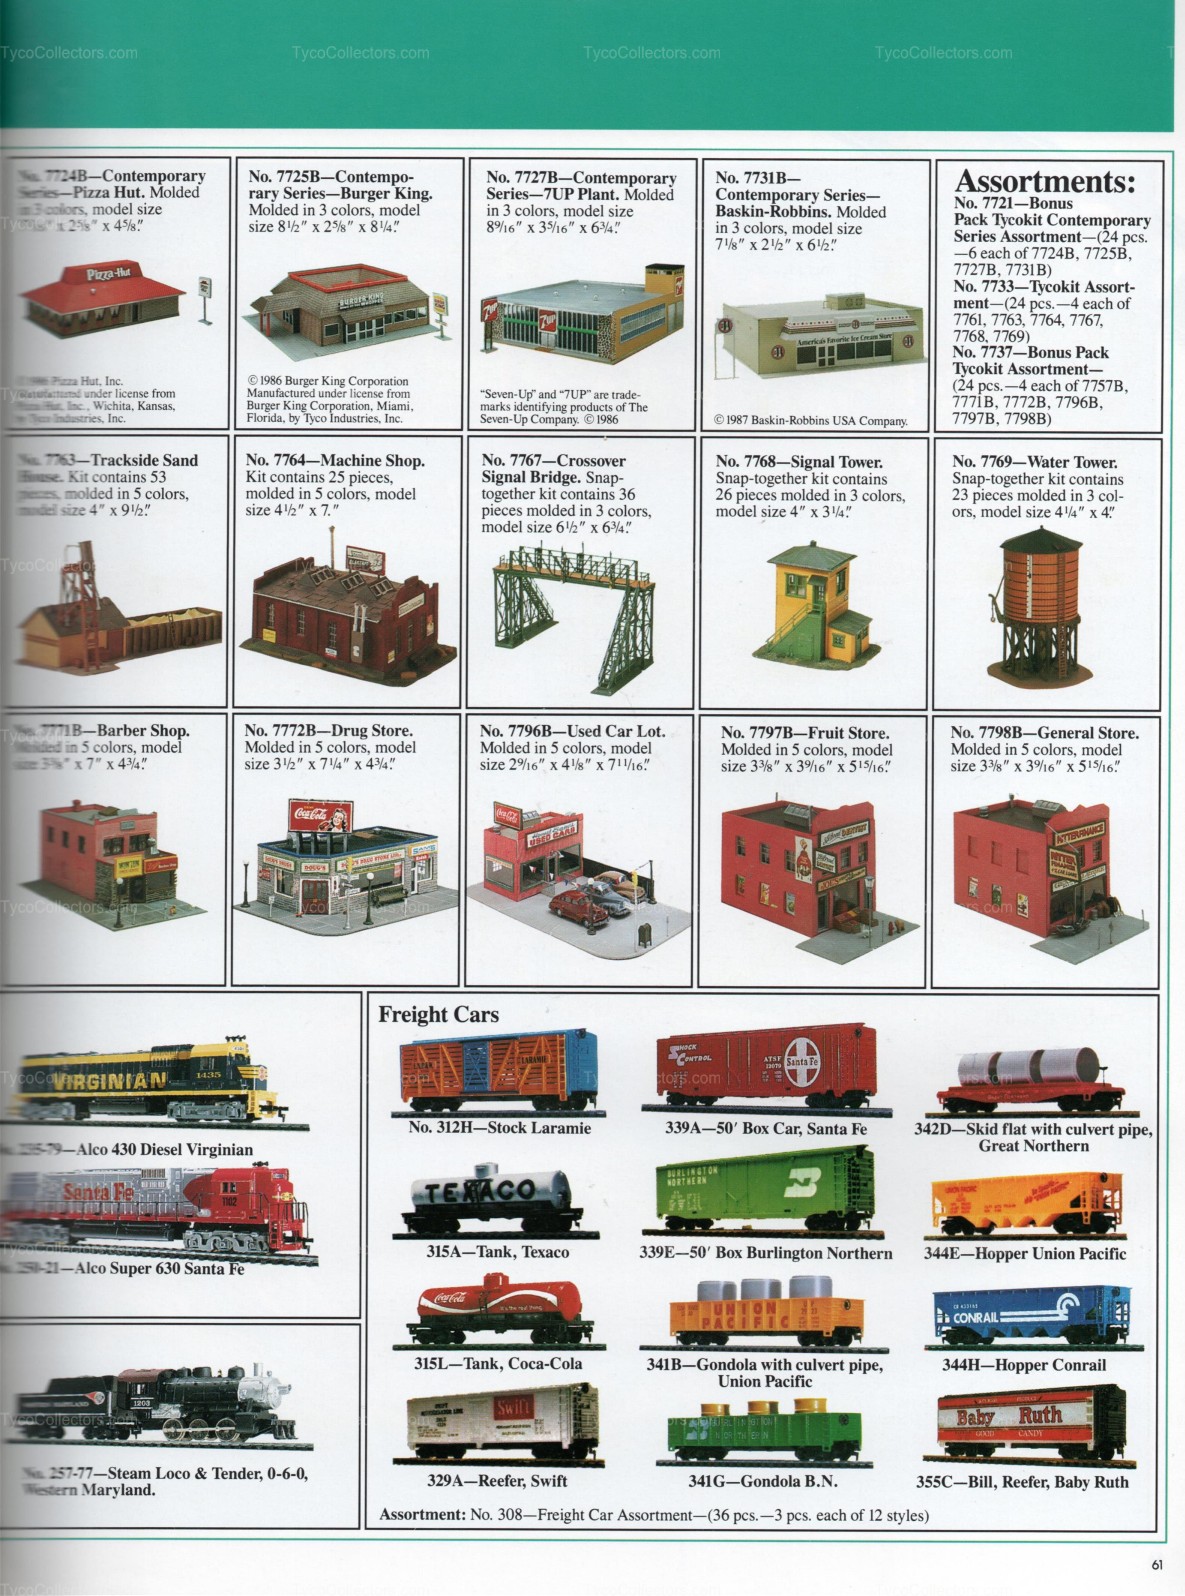 1990 Tyco Toys Catalog Part Two - Tyco Collectors